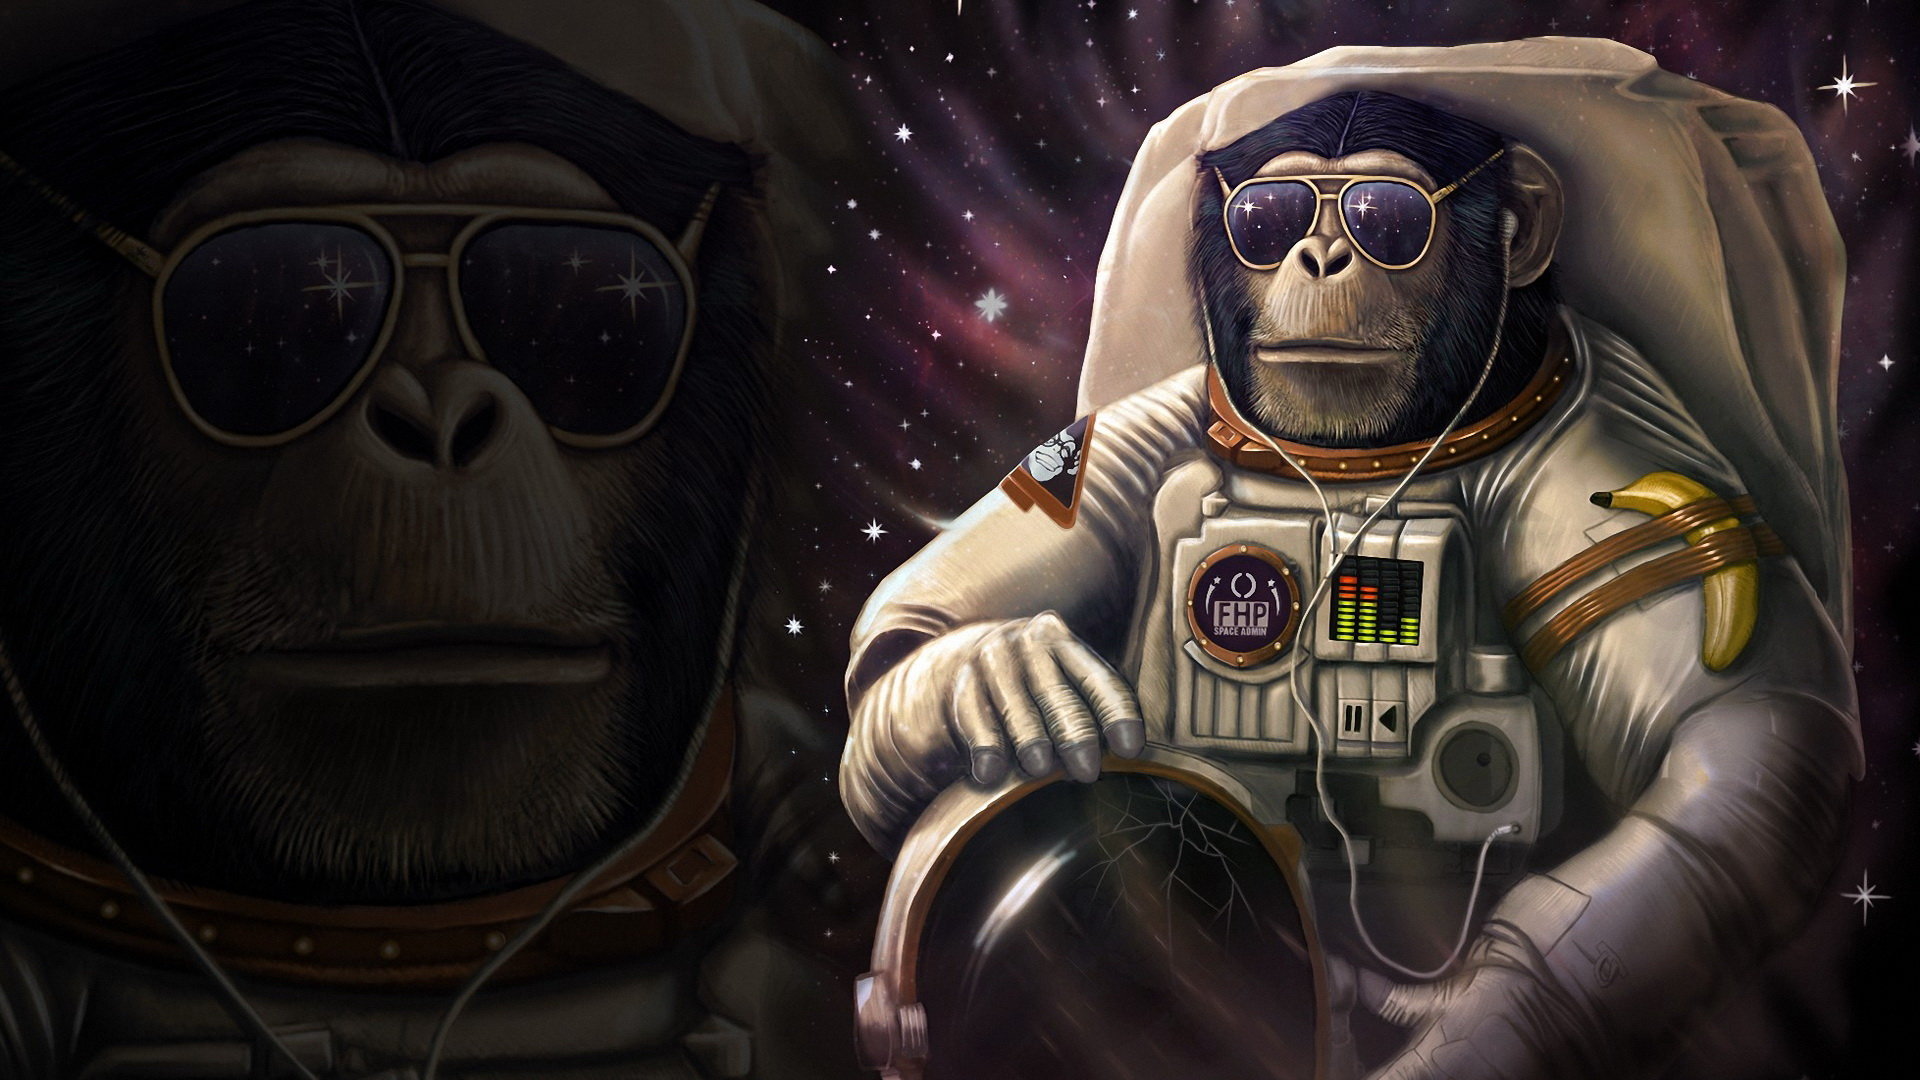 Download full hd 1920x1080 Astronaut computer wallpaper ID:101434 for free